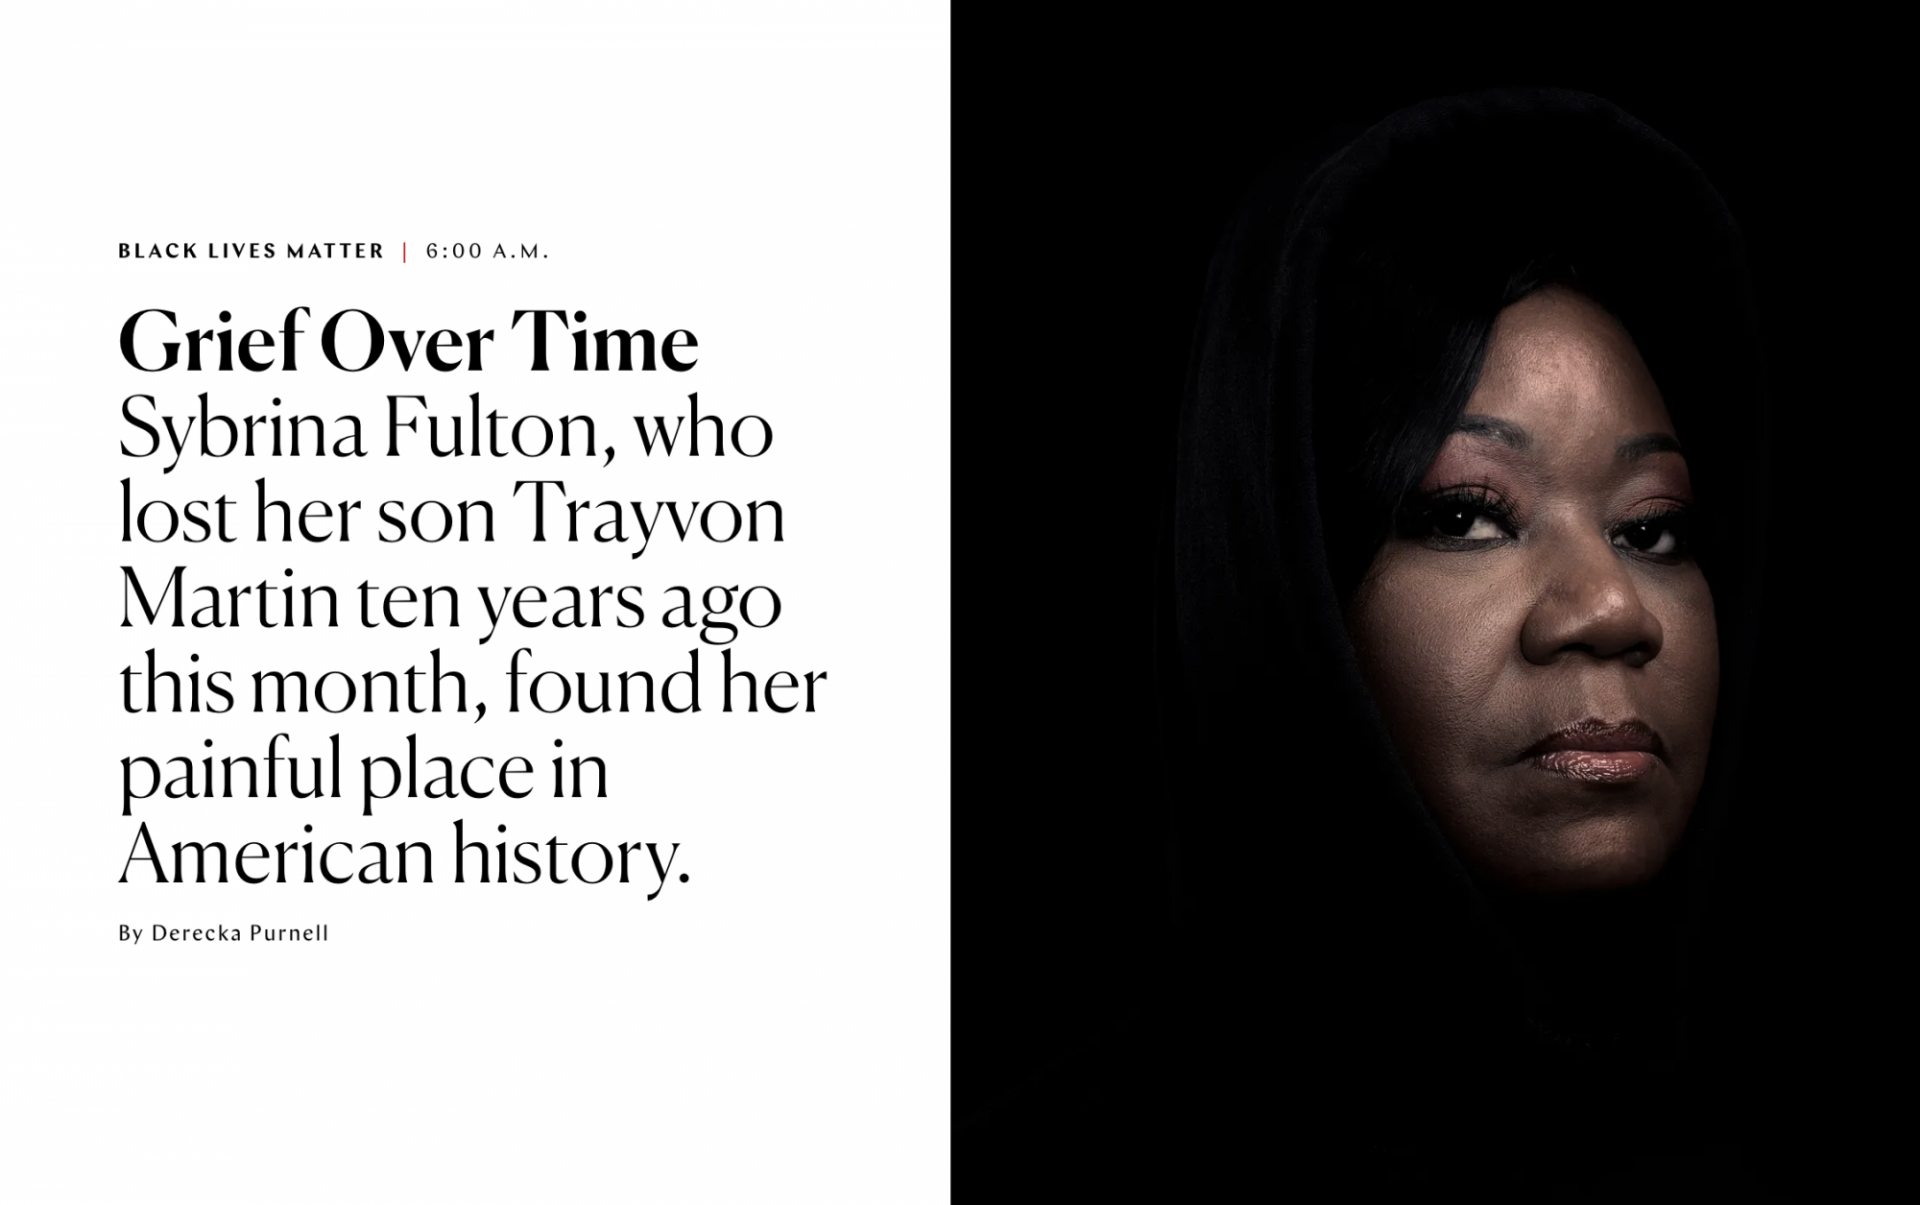 Grief Over Time Sybrina Fulton, who lost her son Trayvon Martin ten years ago this month, found her painful place in American history.